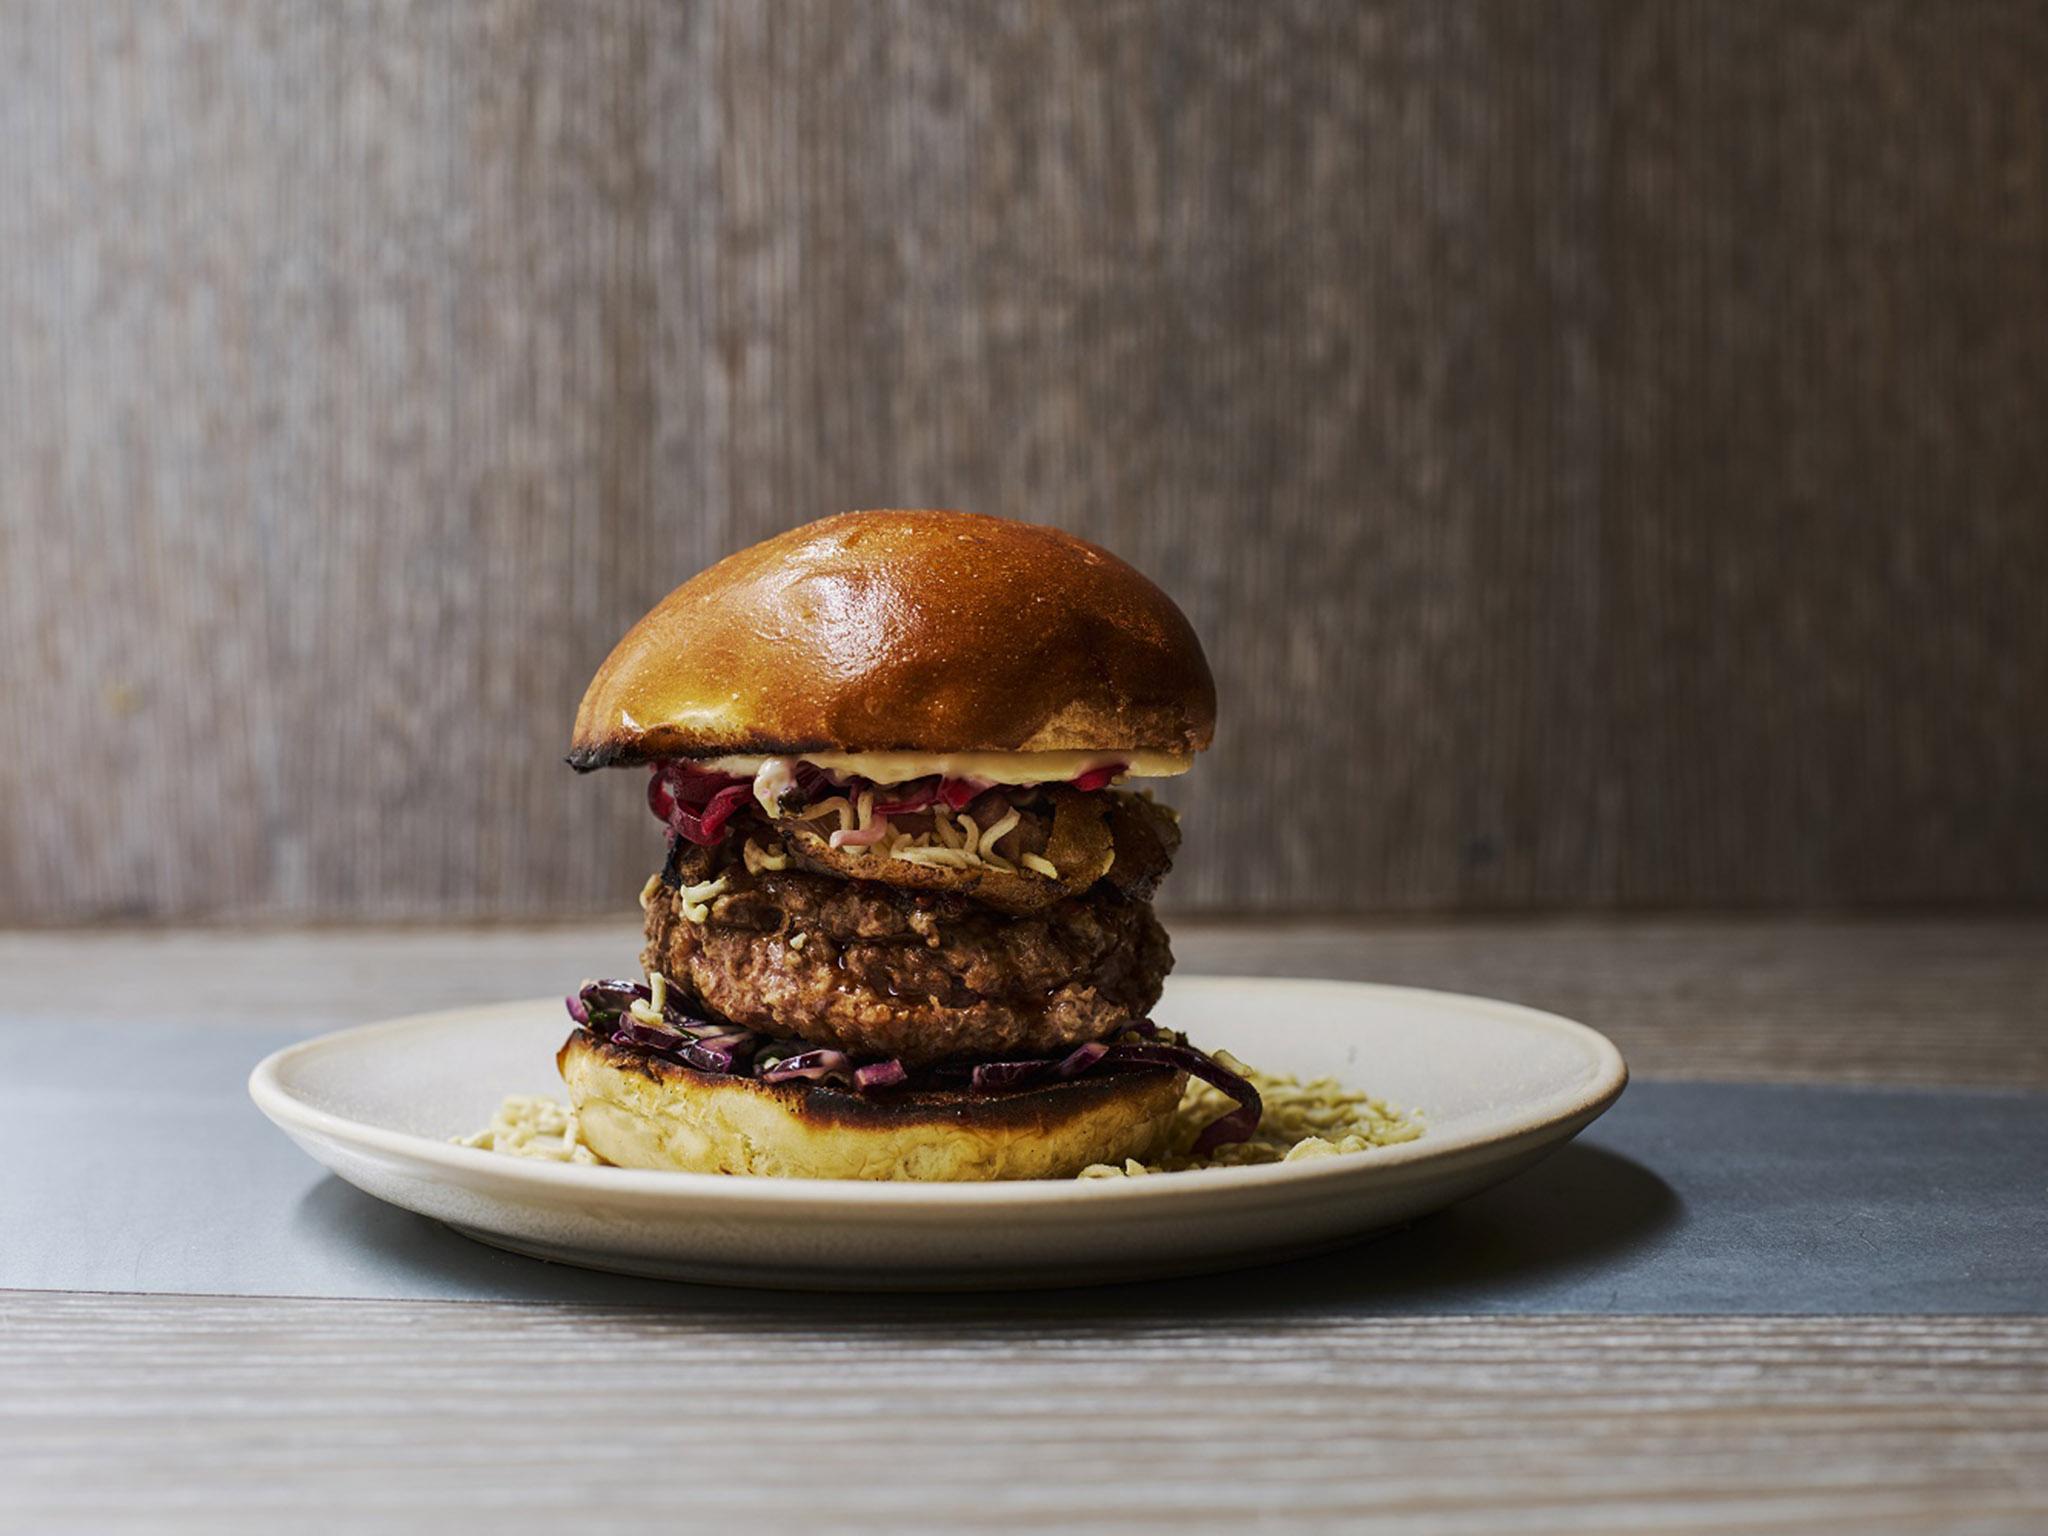 The duck burger at Duck and Waffle Local gives the meat a modern twist